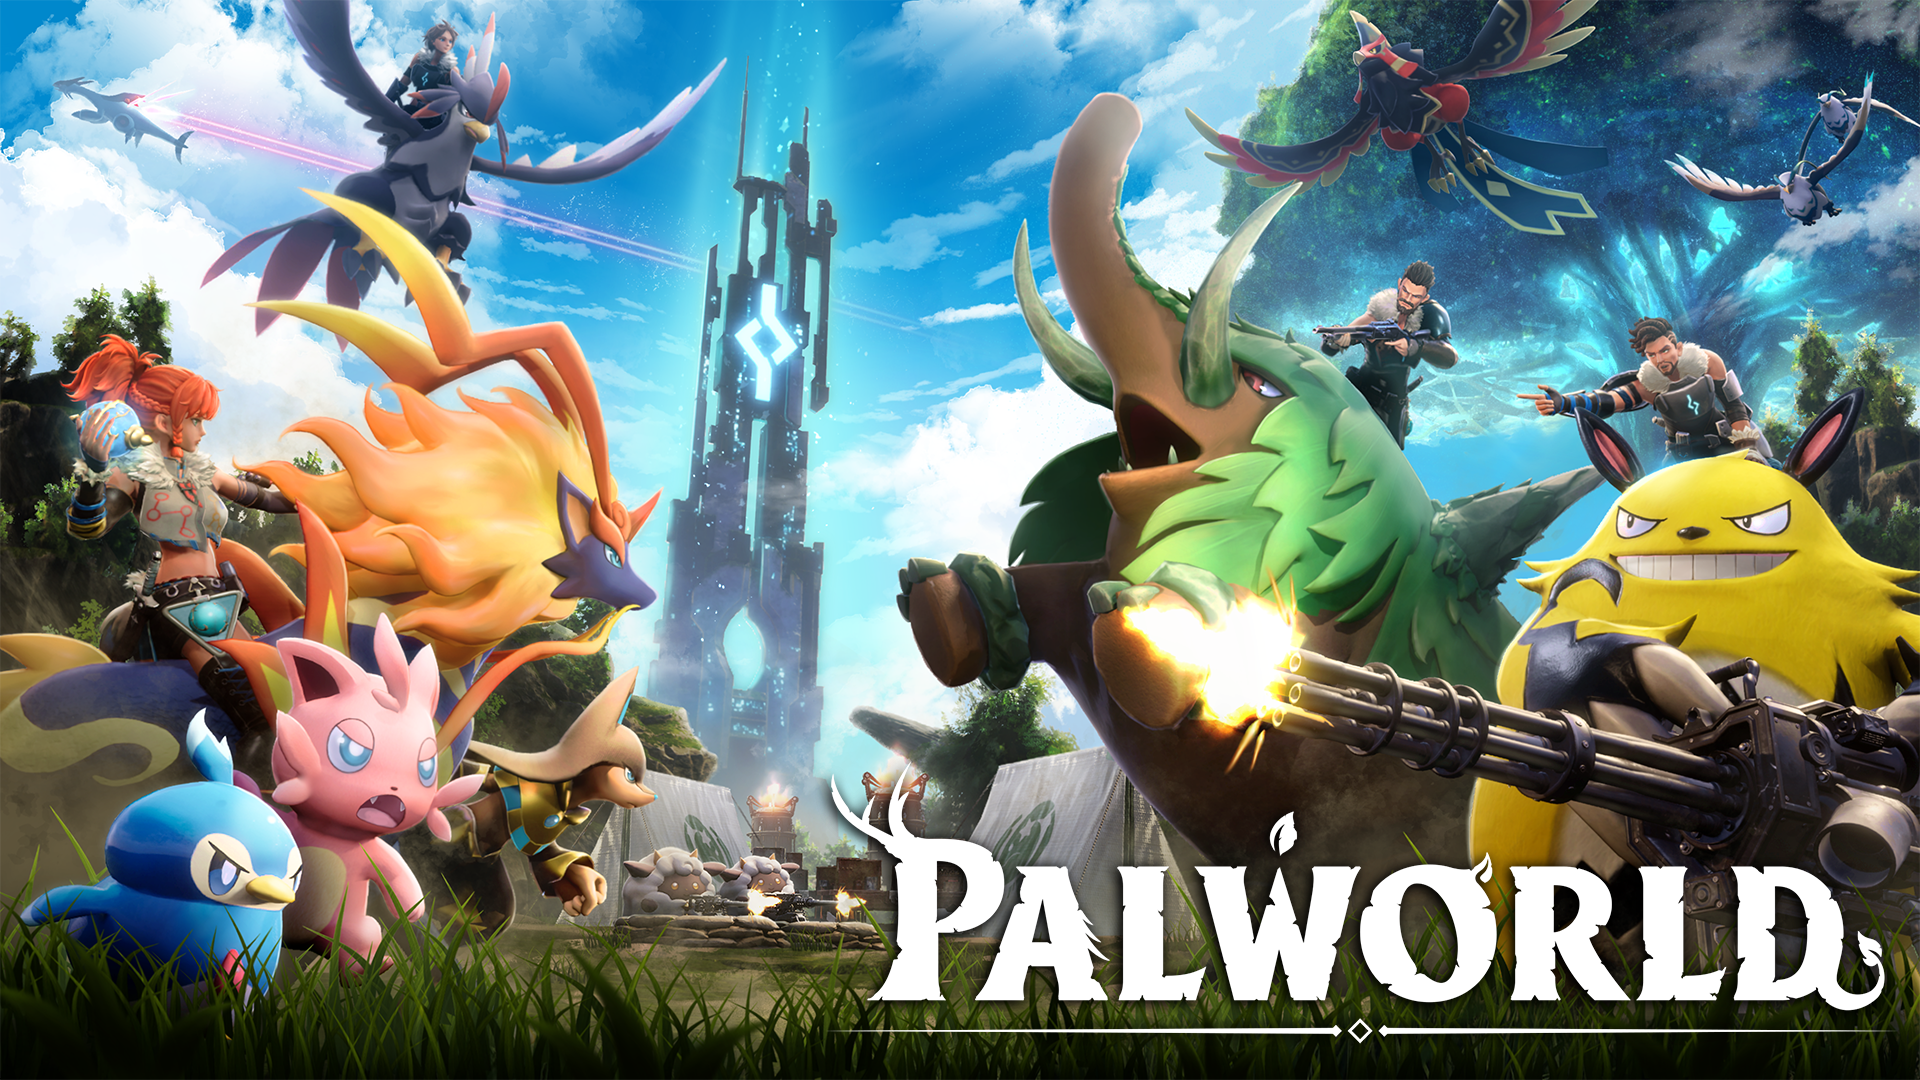 Pocketpair Happily Collaborates with Tencent Cloud to Ensure Immediate Multiplayer Server Access for Palworld